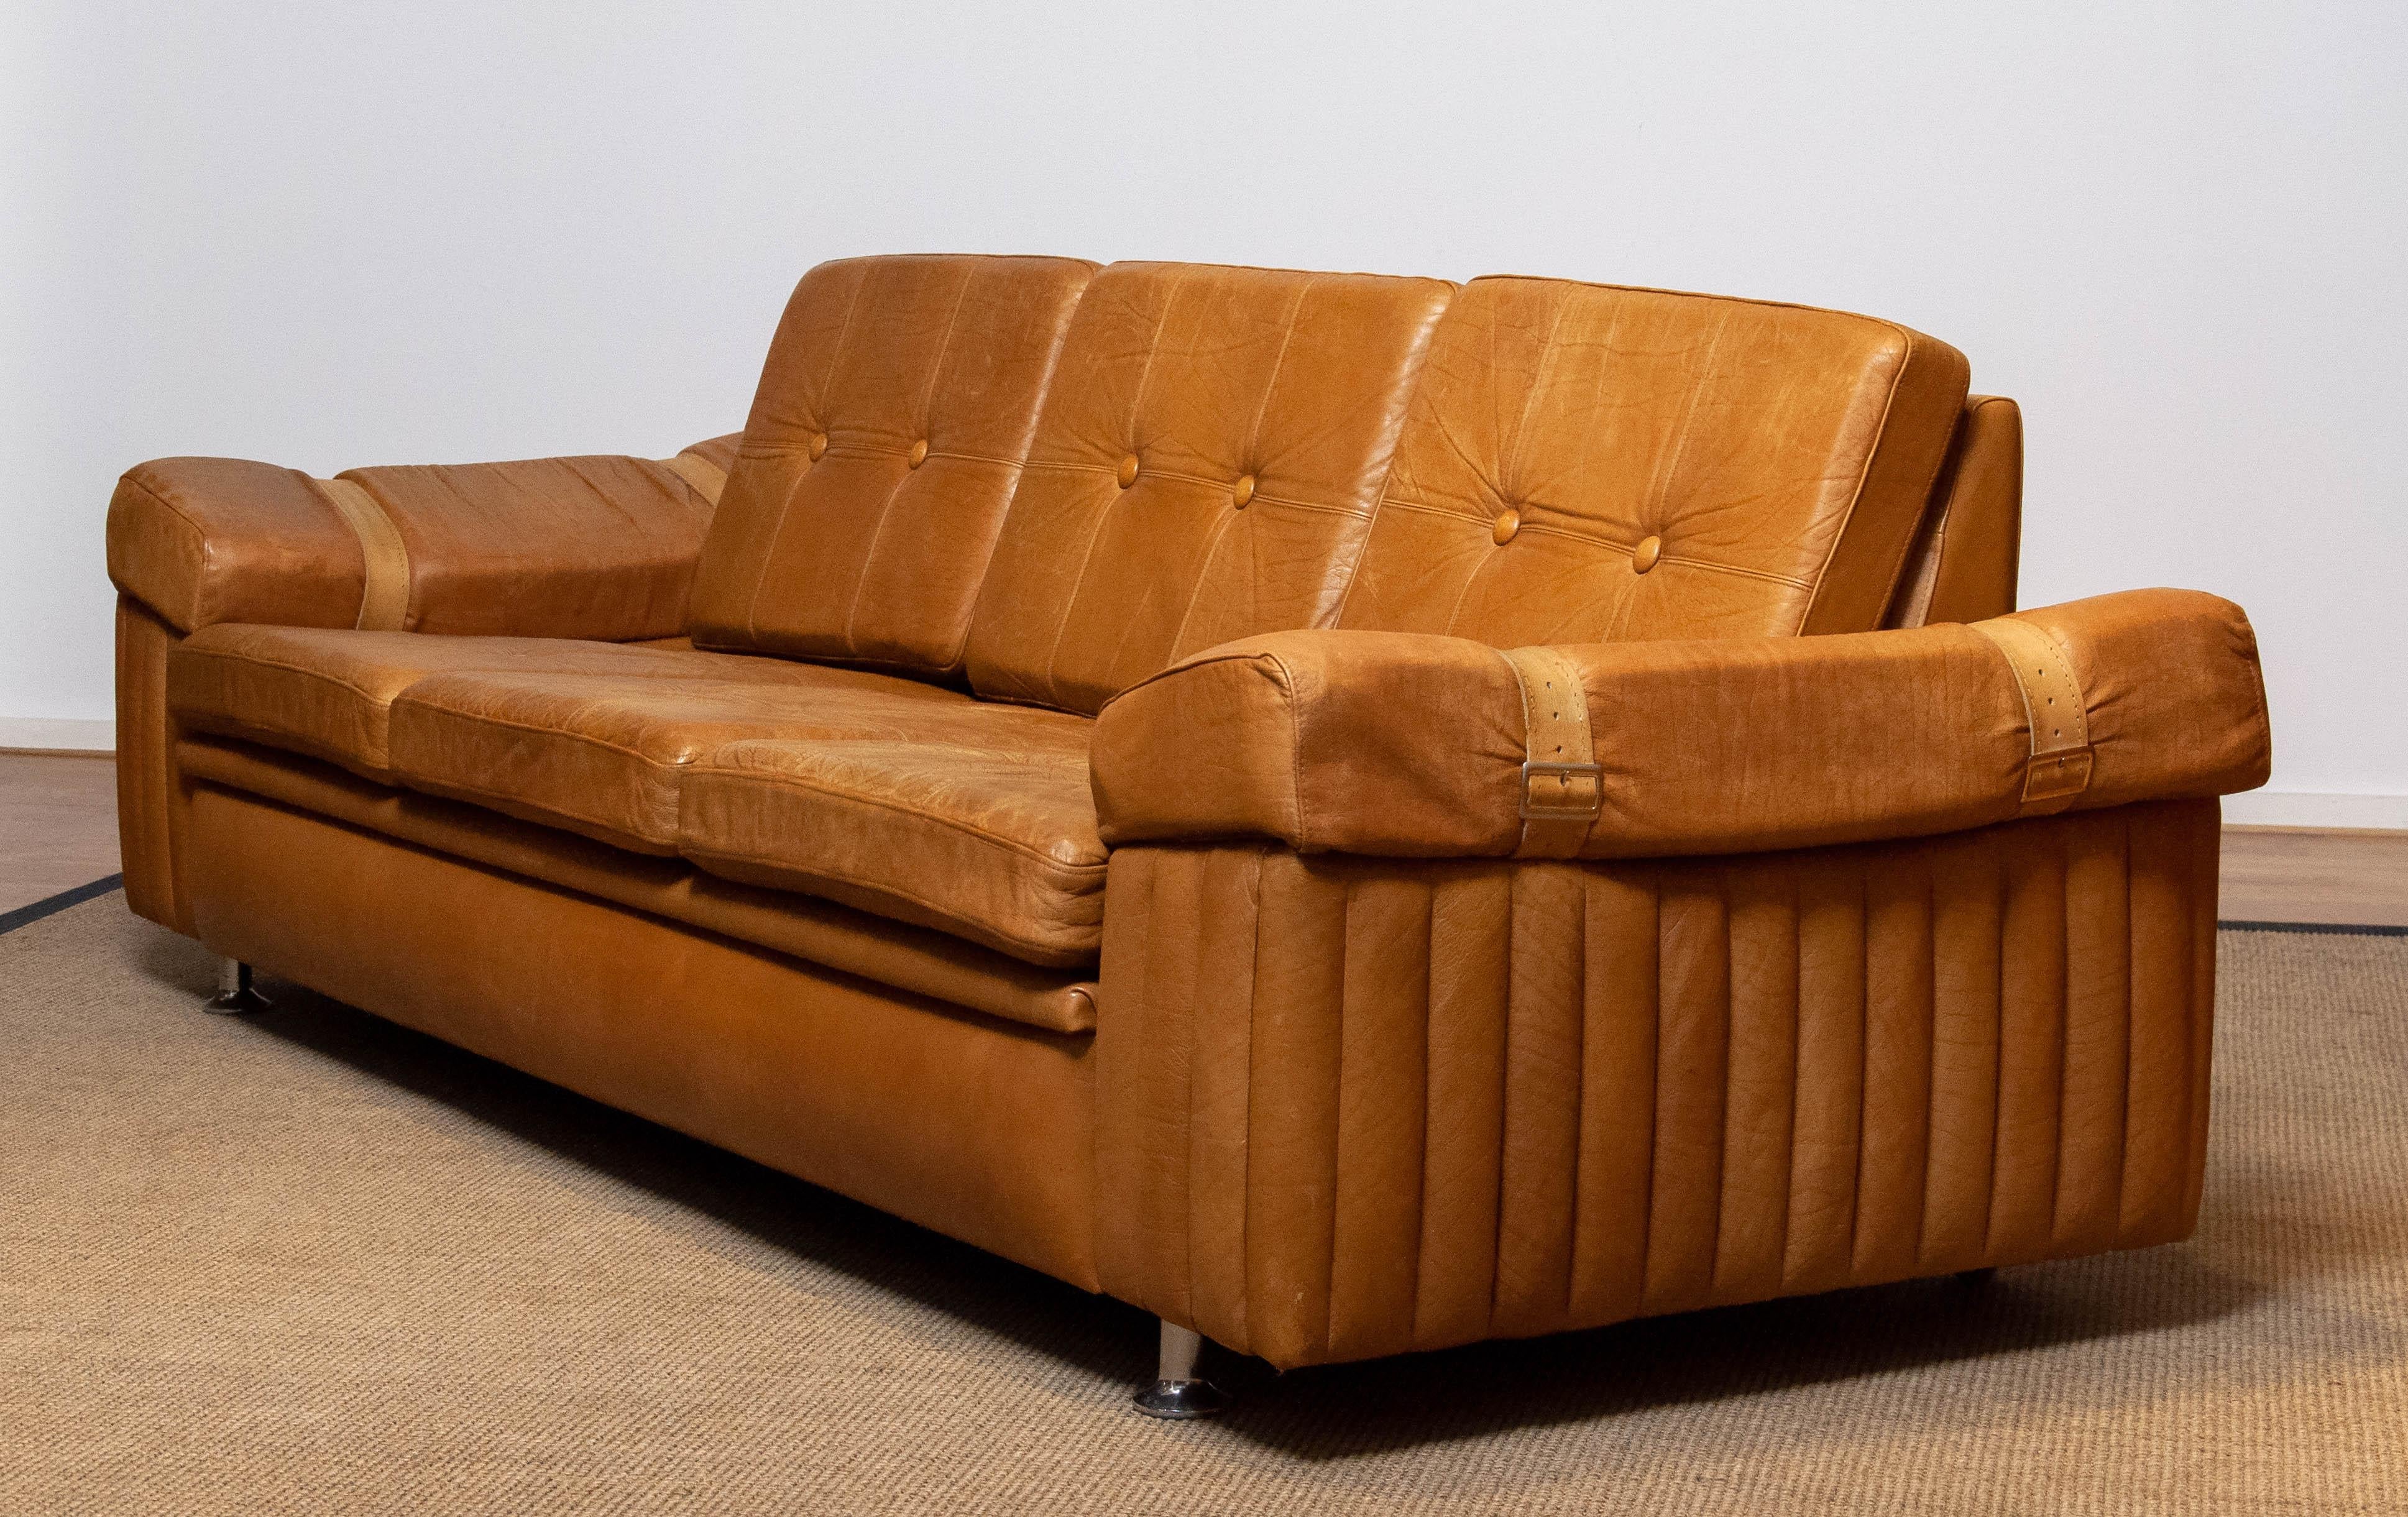 Swedish 1970s Scandinavian Brutalist Three-Seater Low-Back Sofa in Camel Colored Leather For Sale